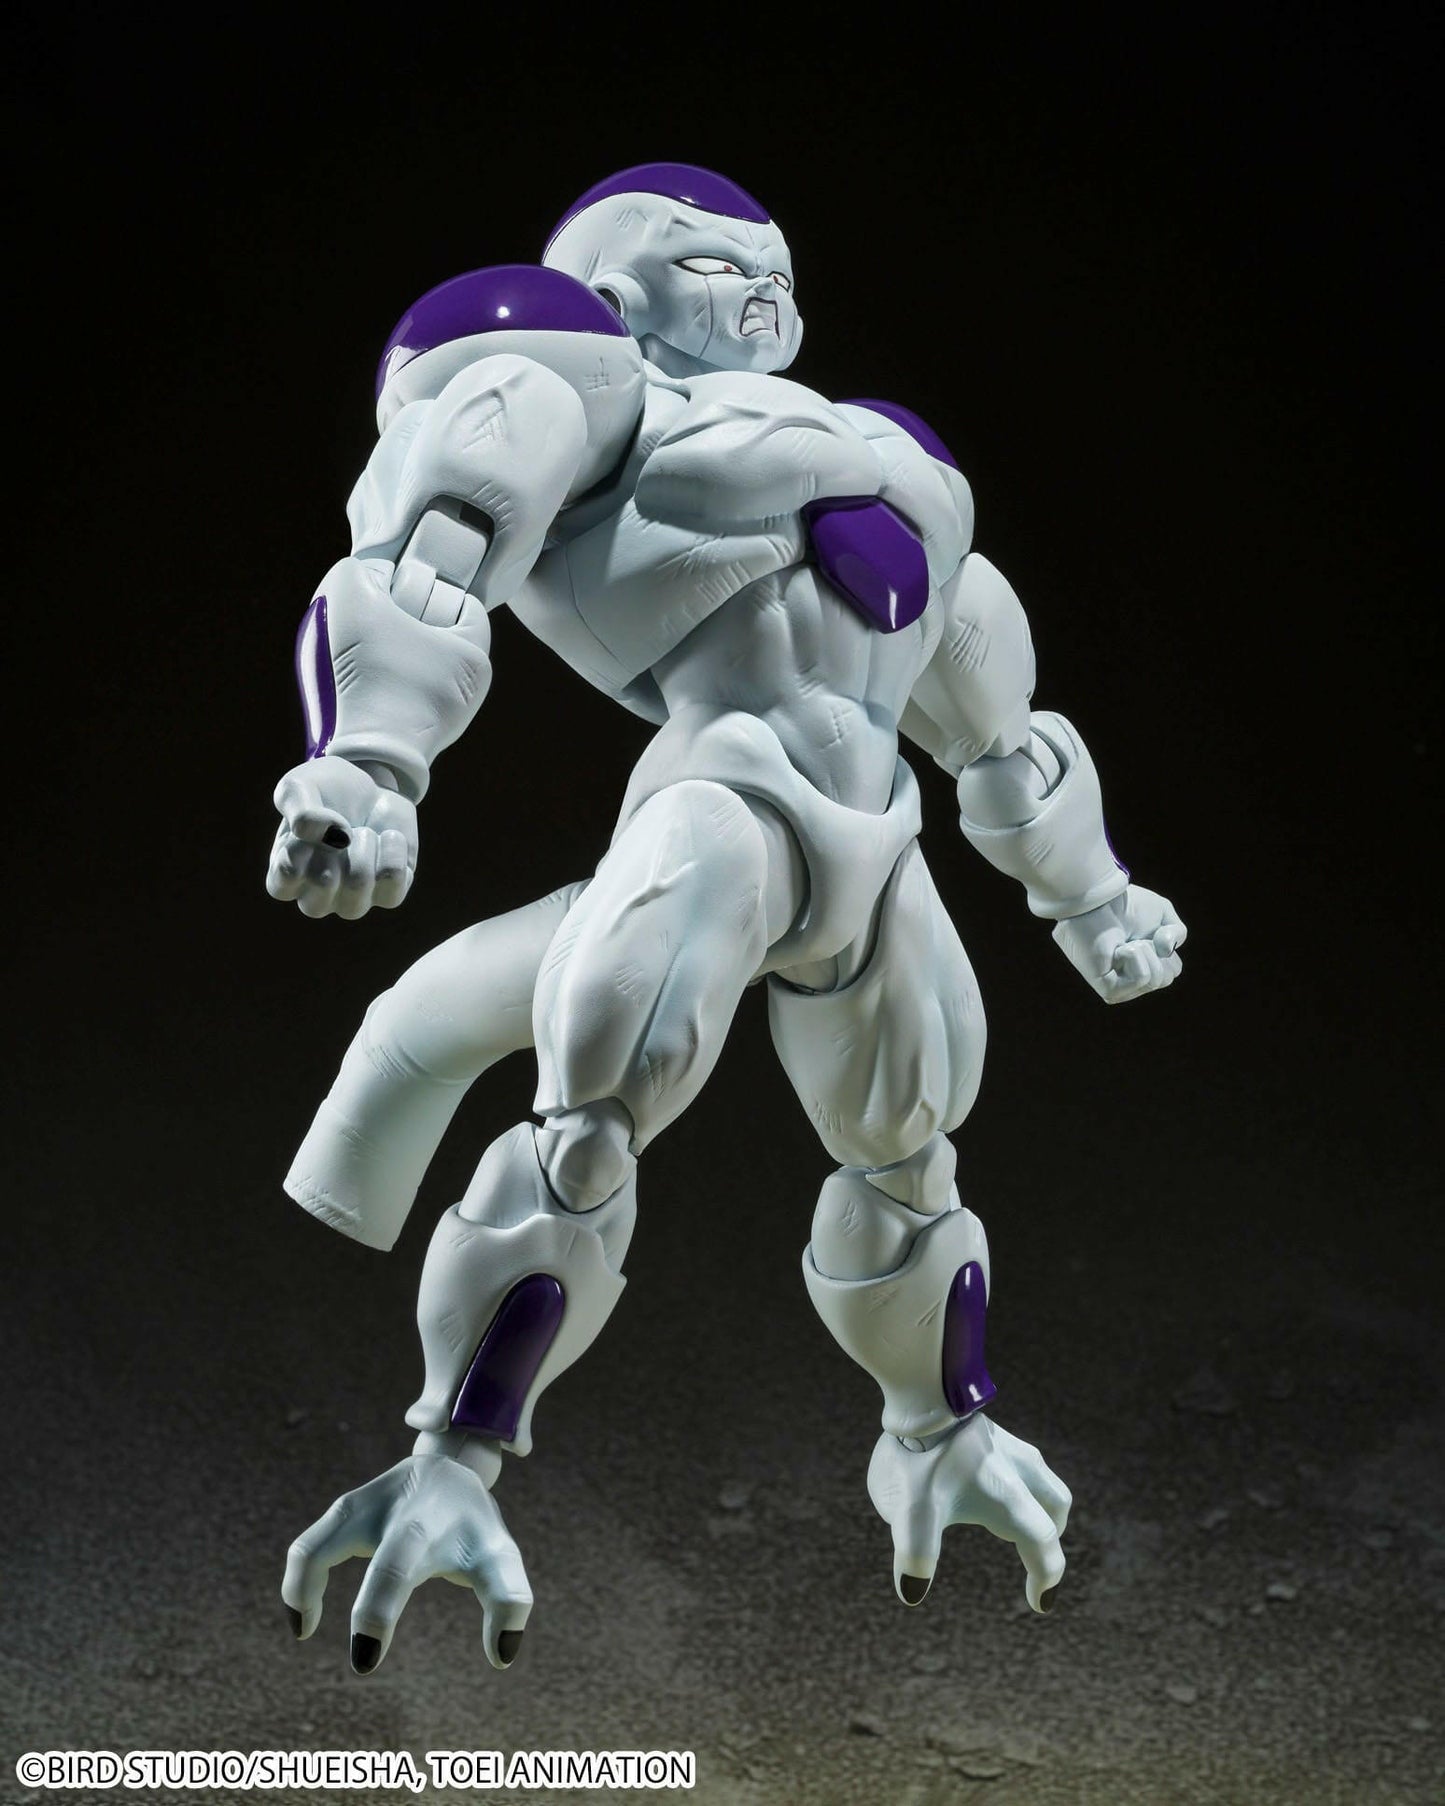 Pre-Order! S.H. Figuarts Dragon Ball Z Actionfigur Full Power Frieza 13cm Tamashii Nations